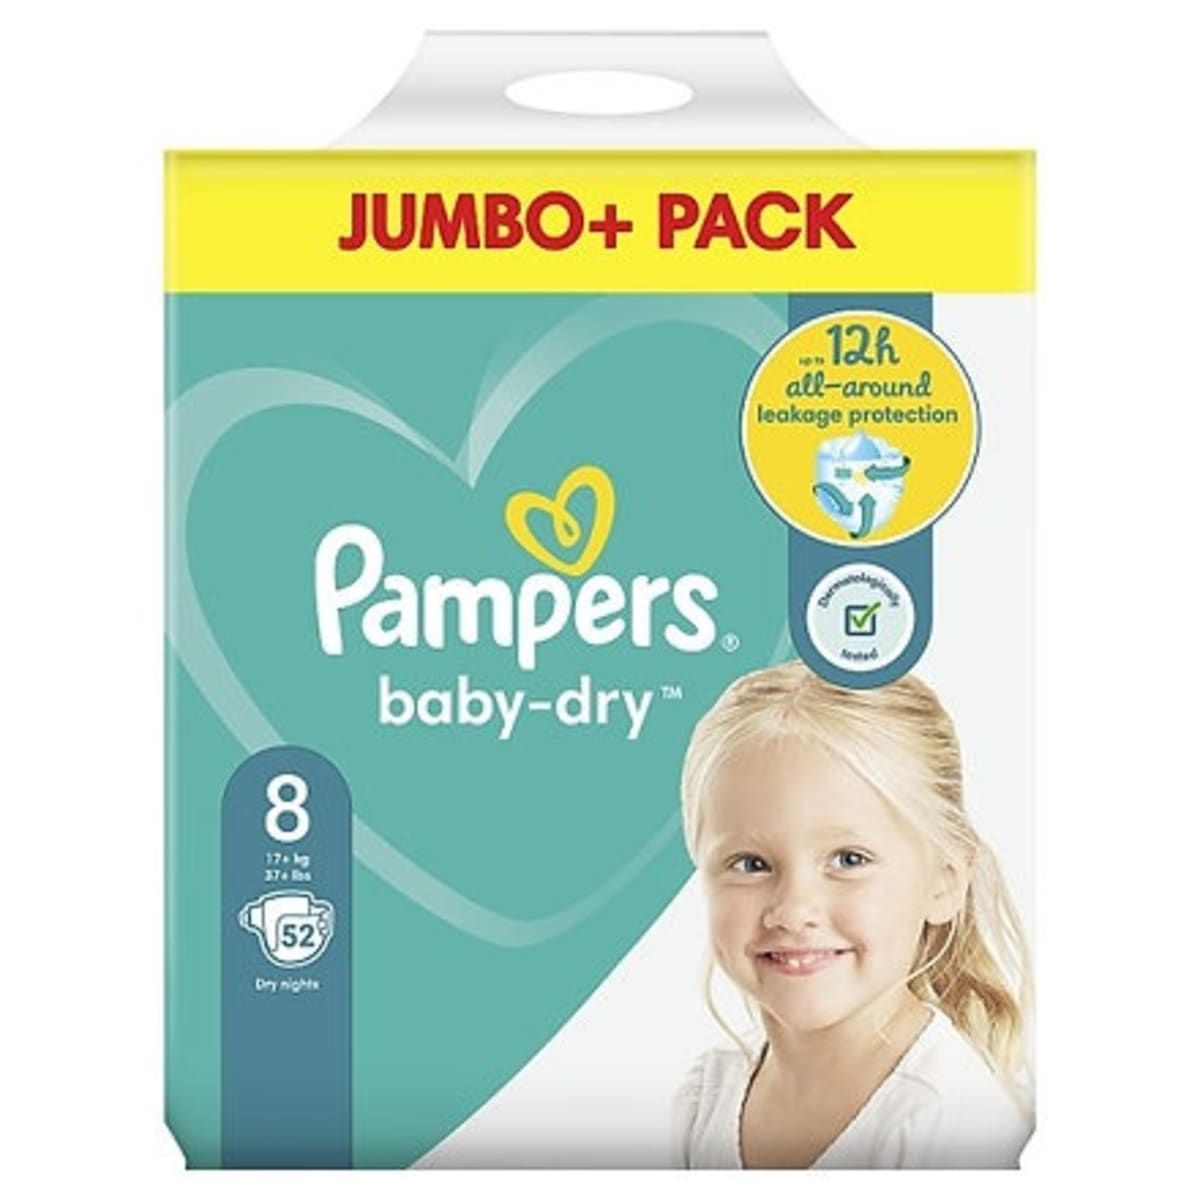 Pampers Baby-Dry Size 8 Nappies Jumbo Pack 52 Pack